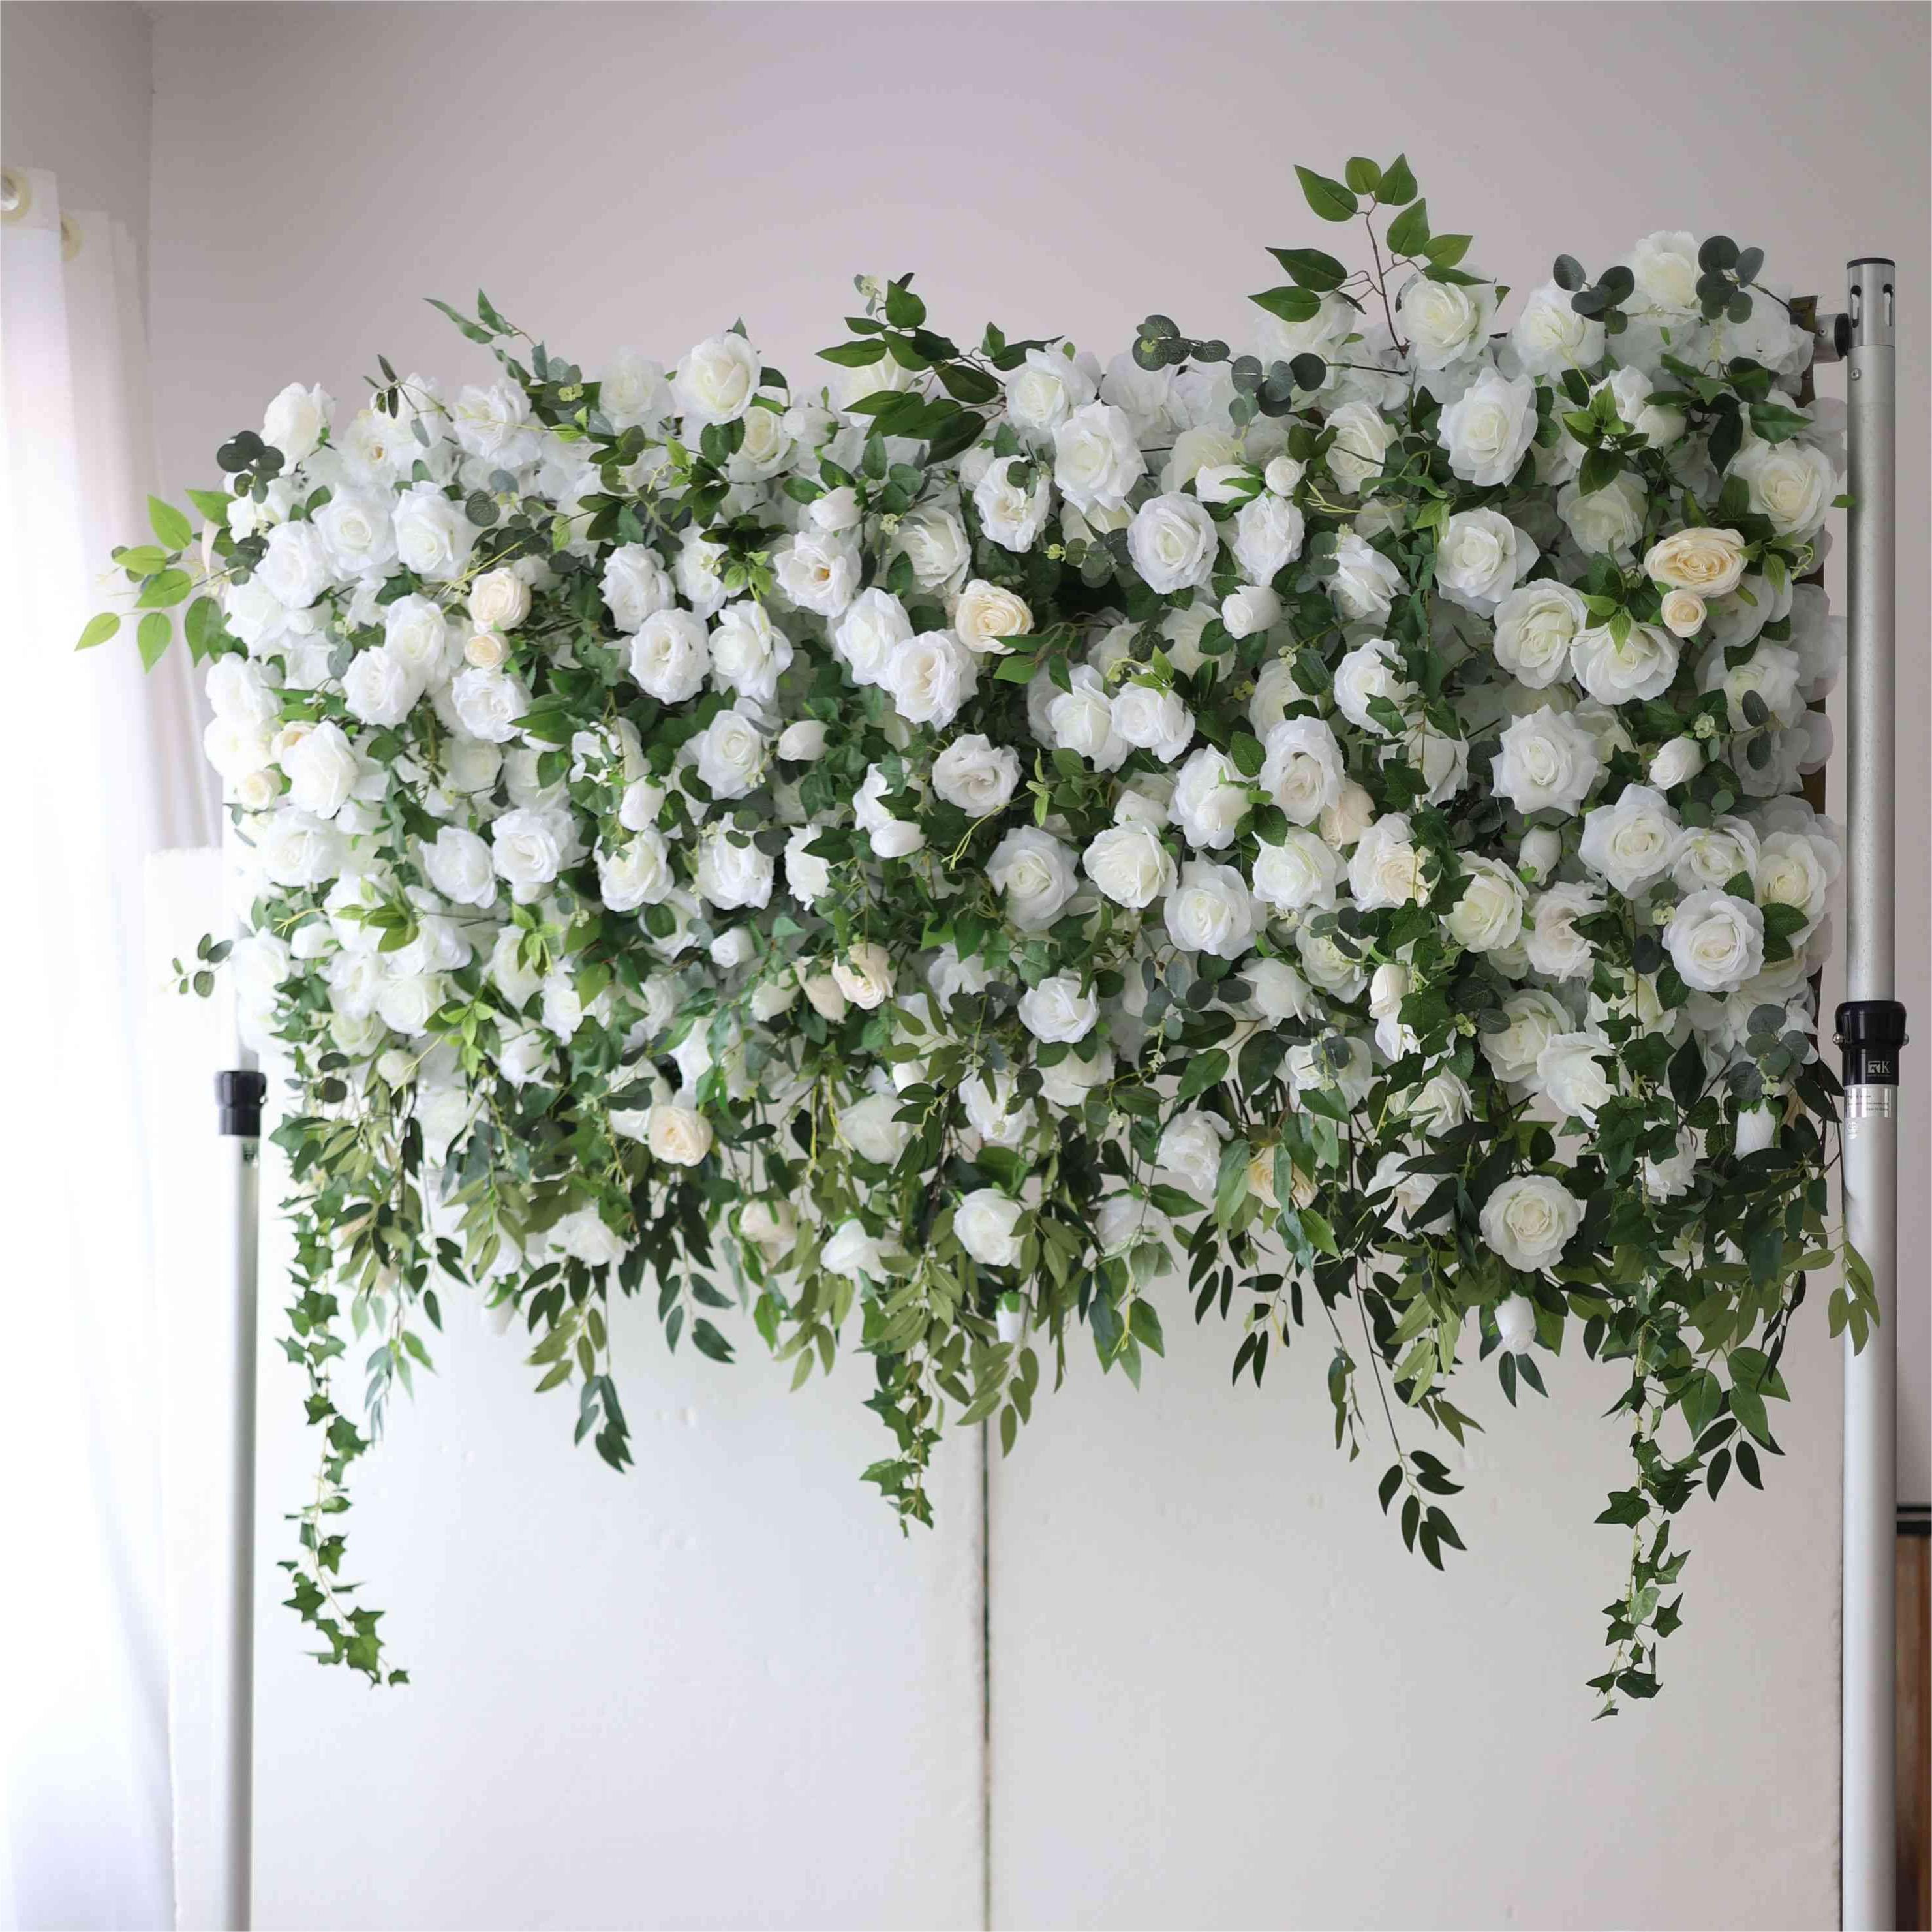 The white green florals flower wall looks noble and elegant.